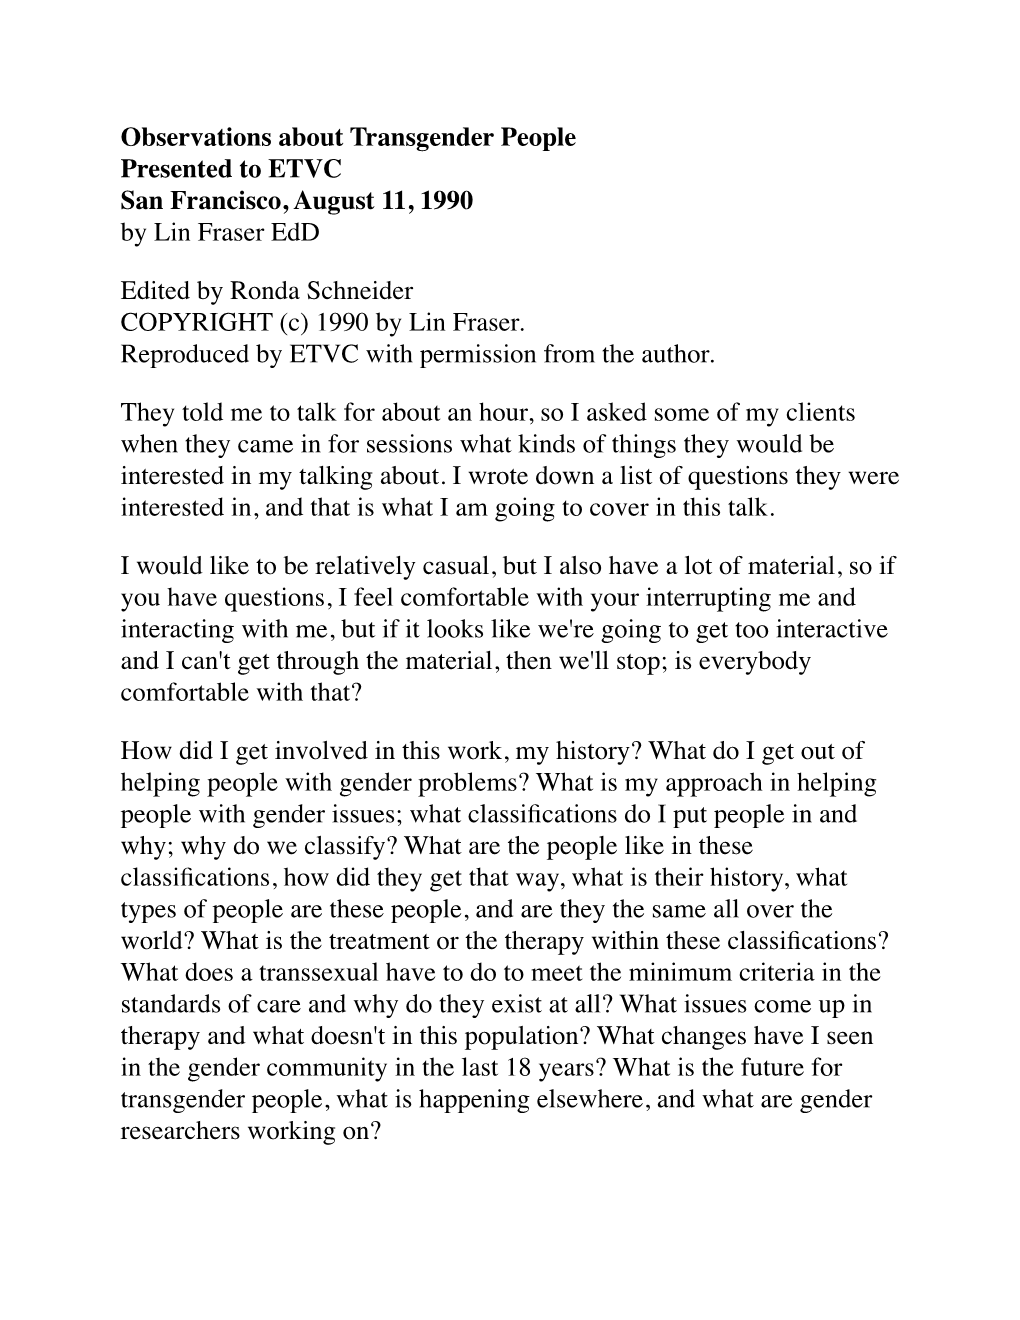 Observations About Transgender People Presented to ETVC San Francisco, August 11, 1990 by Lin Fraser Edd